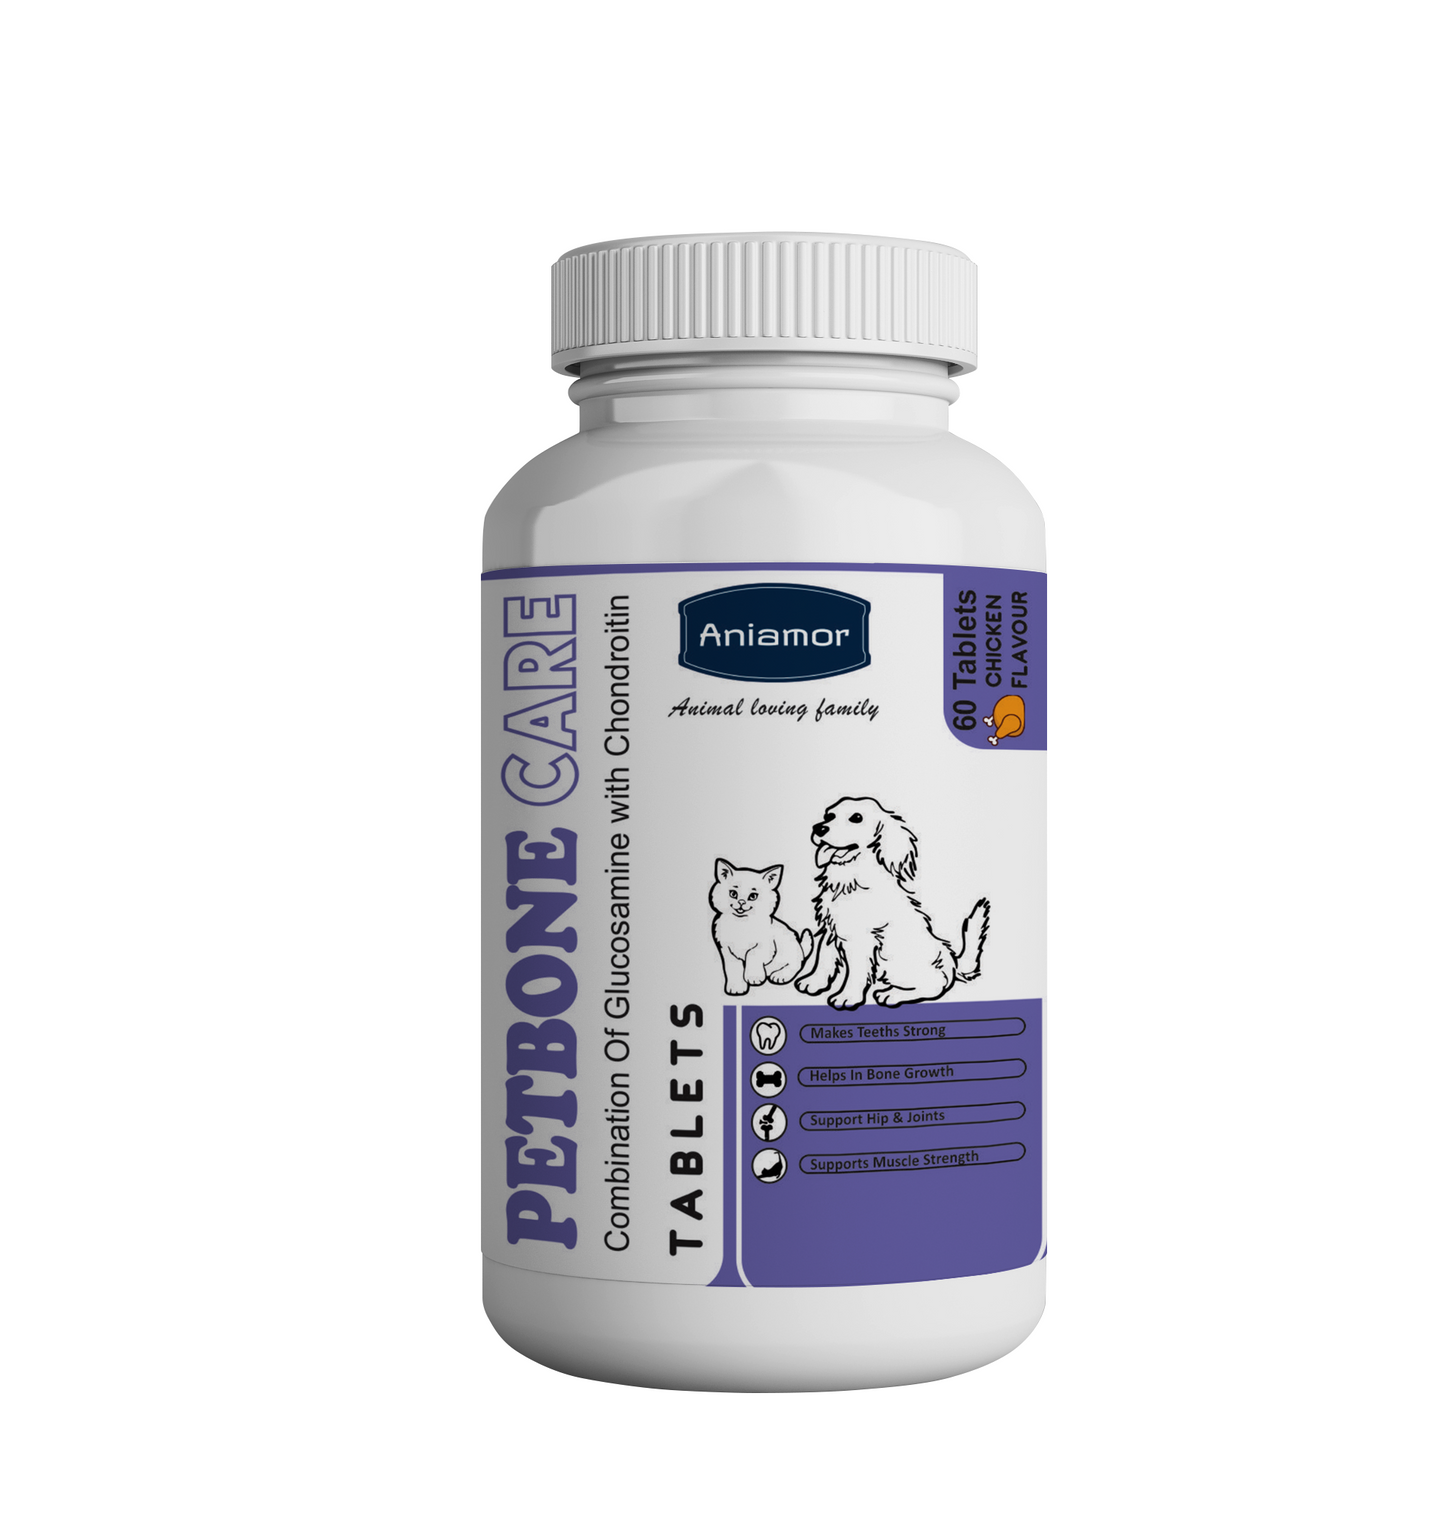 Pet bone Tablets for pets-Aniamor| Glucosamine and Chondroitin Tablets| 60 Tablets